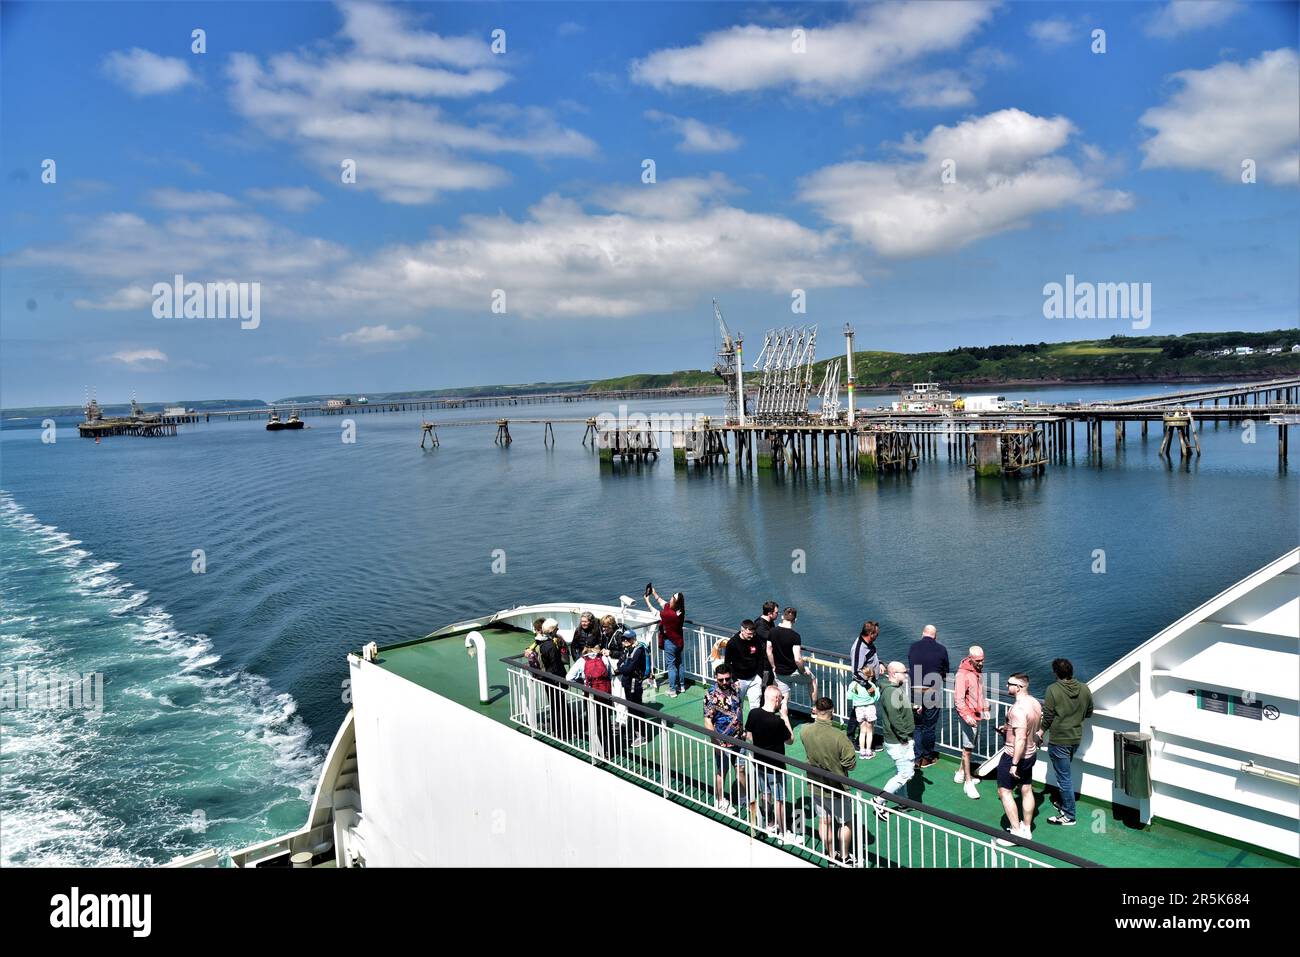 Pictures show approaching Milford Haven waterway and Energy Park heading towards Pembroke Dock .Pictured from the stern of the OSCAR WILDE super ferry Stock Photo